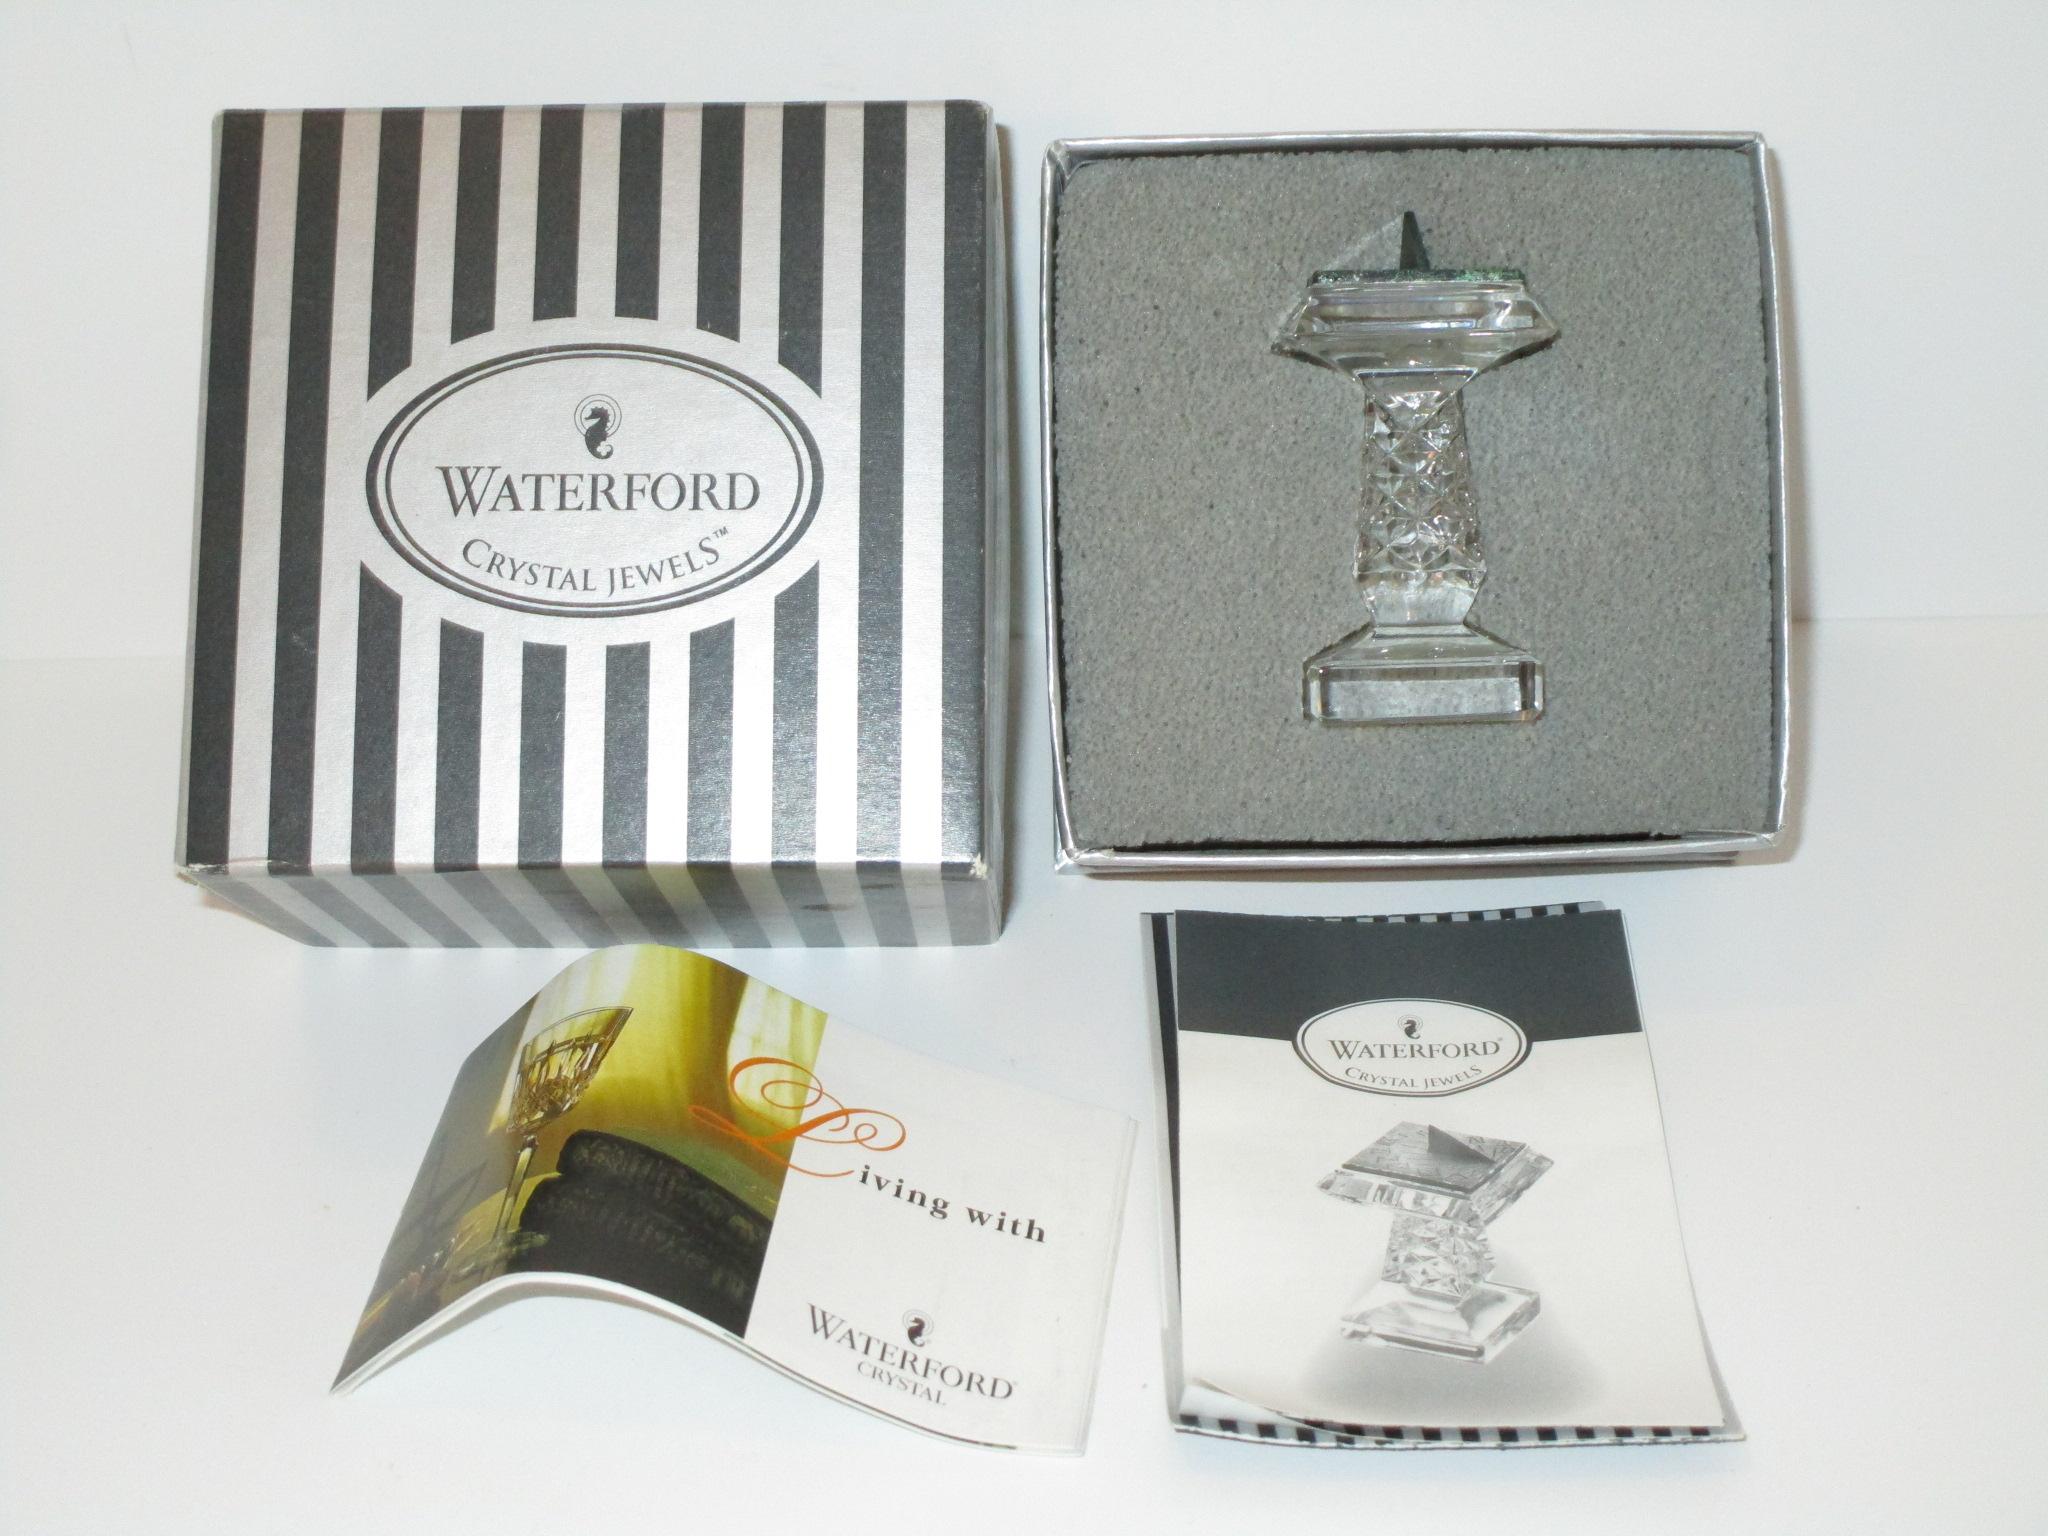 Waterford Crystal Candlestick in box